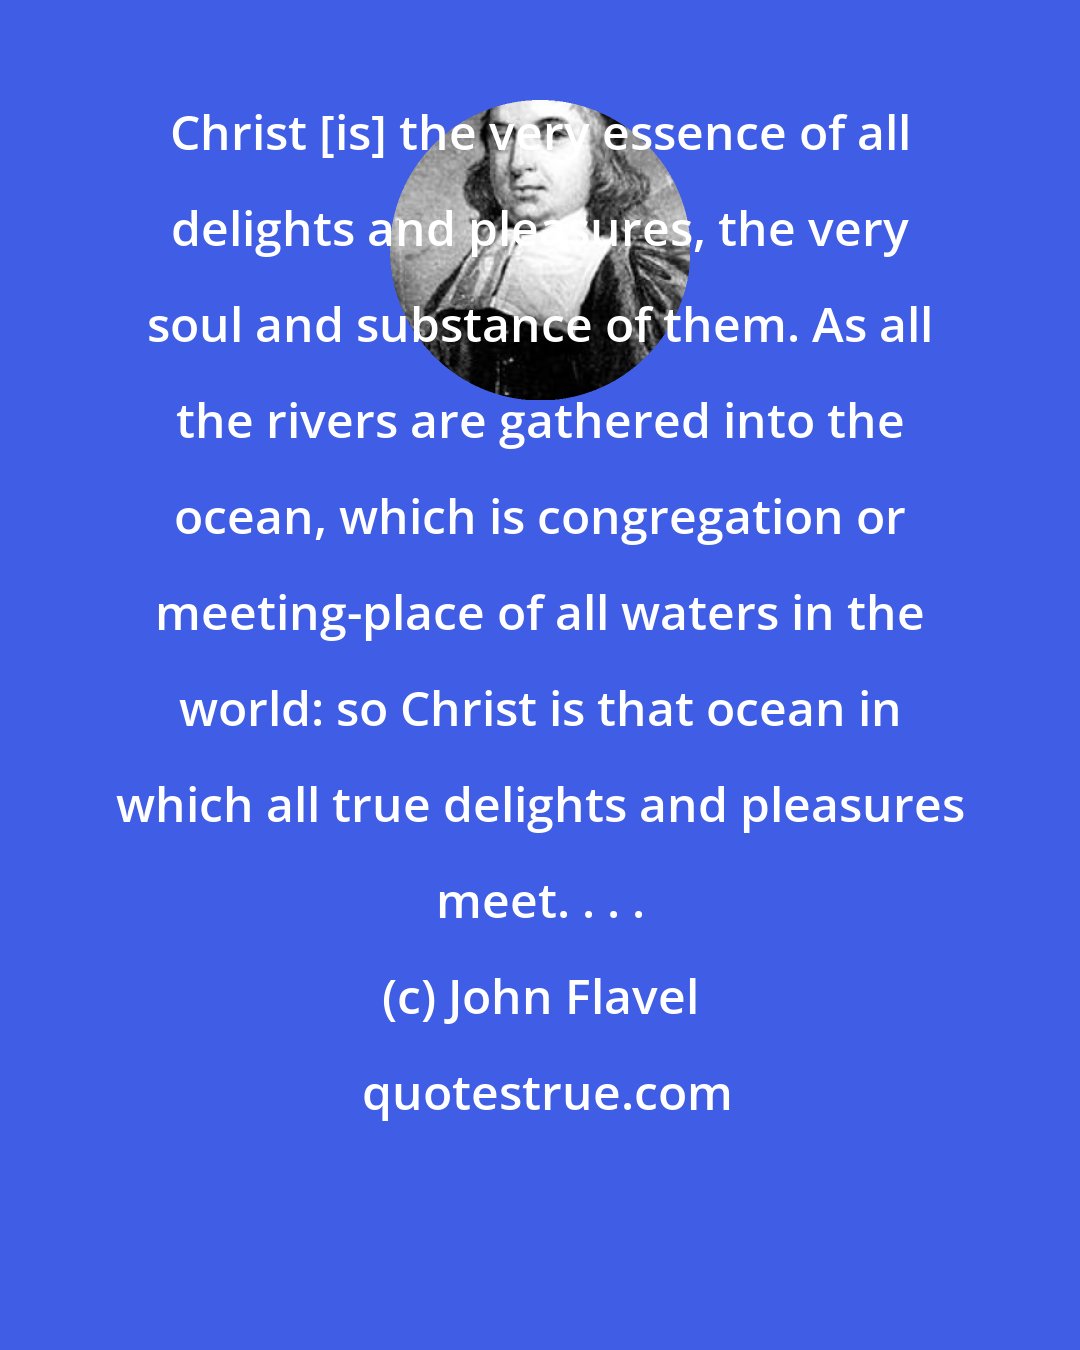 John Flavel: Christ [is] the very essence of all delights and pleasures, the very soul and substance of them. As all the rivers are gathered into the ocean, which is congregation or meeting-place of all waters in the world: so Christ is that ocean in which all true delights and pleasures meet. . . .